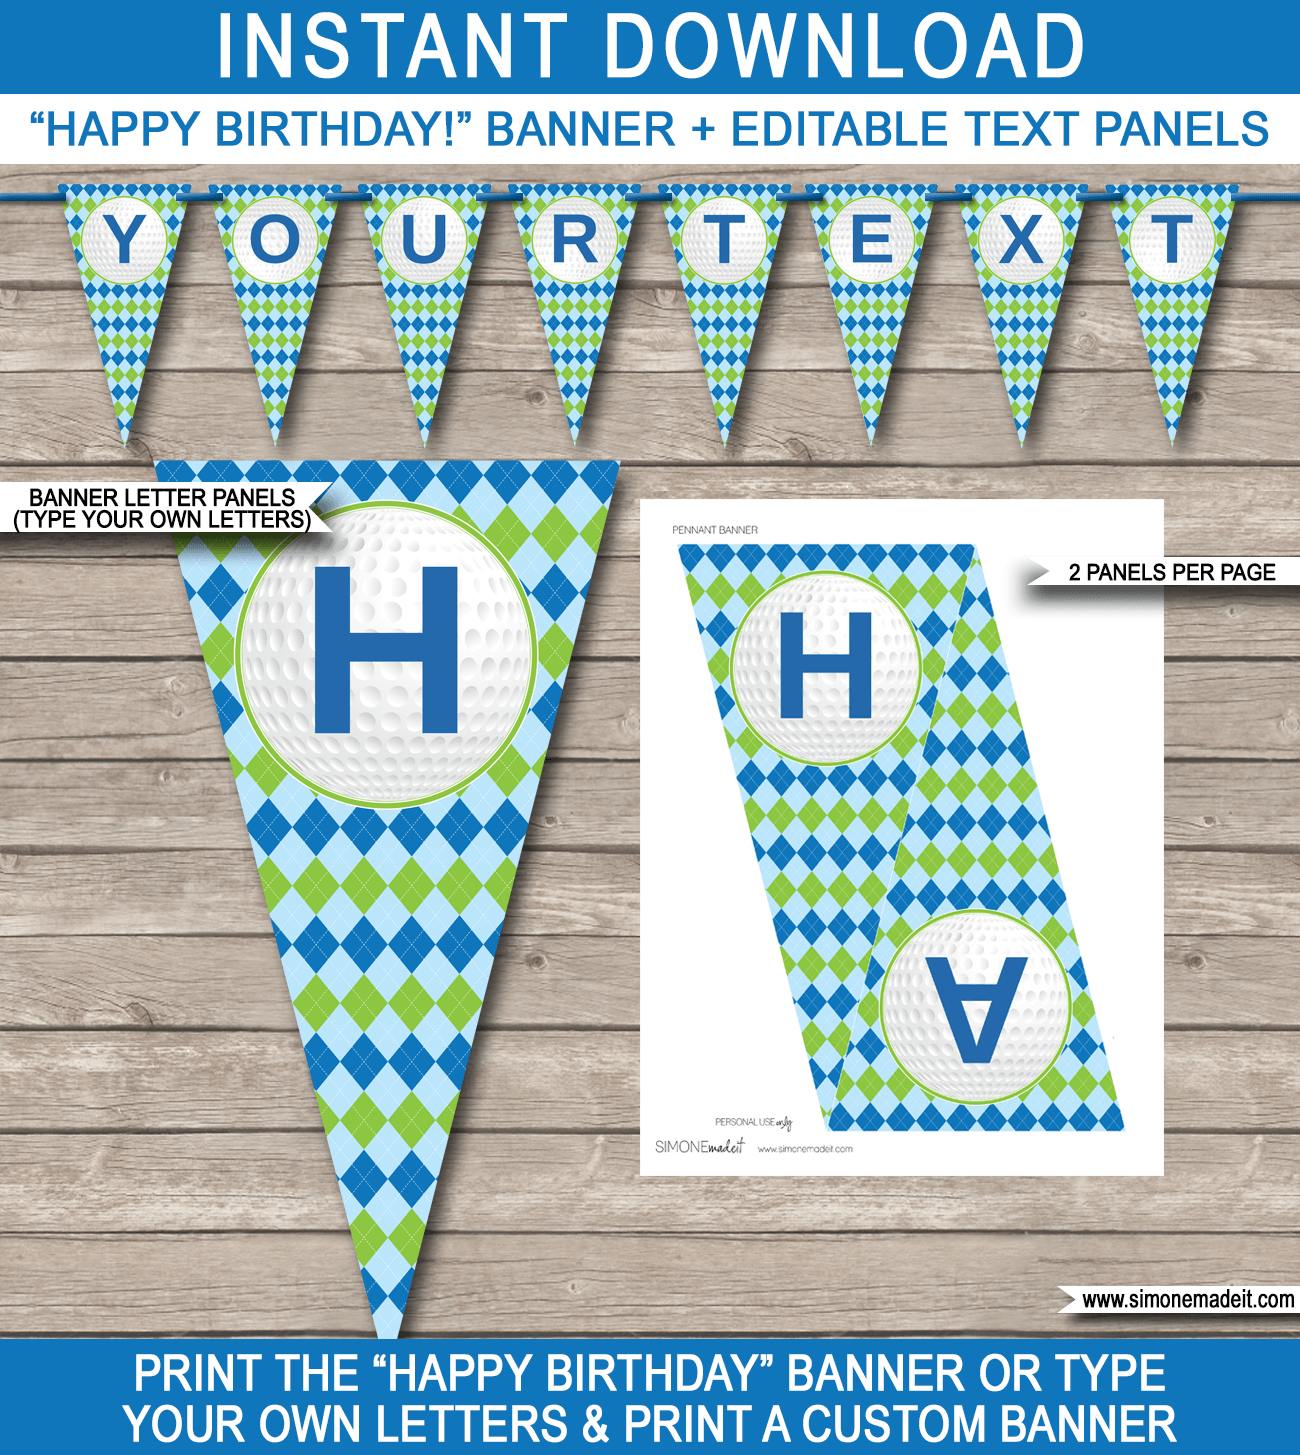 Golf Party Banner Template - Golf Bunting - Happy Birthday Banner - Birthday Party - Editable and Printable DIY Template - INSTANT DOWNLOAD $4.50 via simonemadeit.com